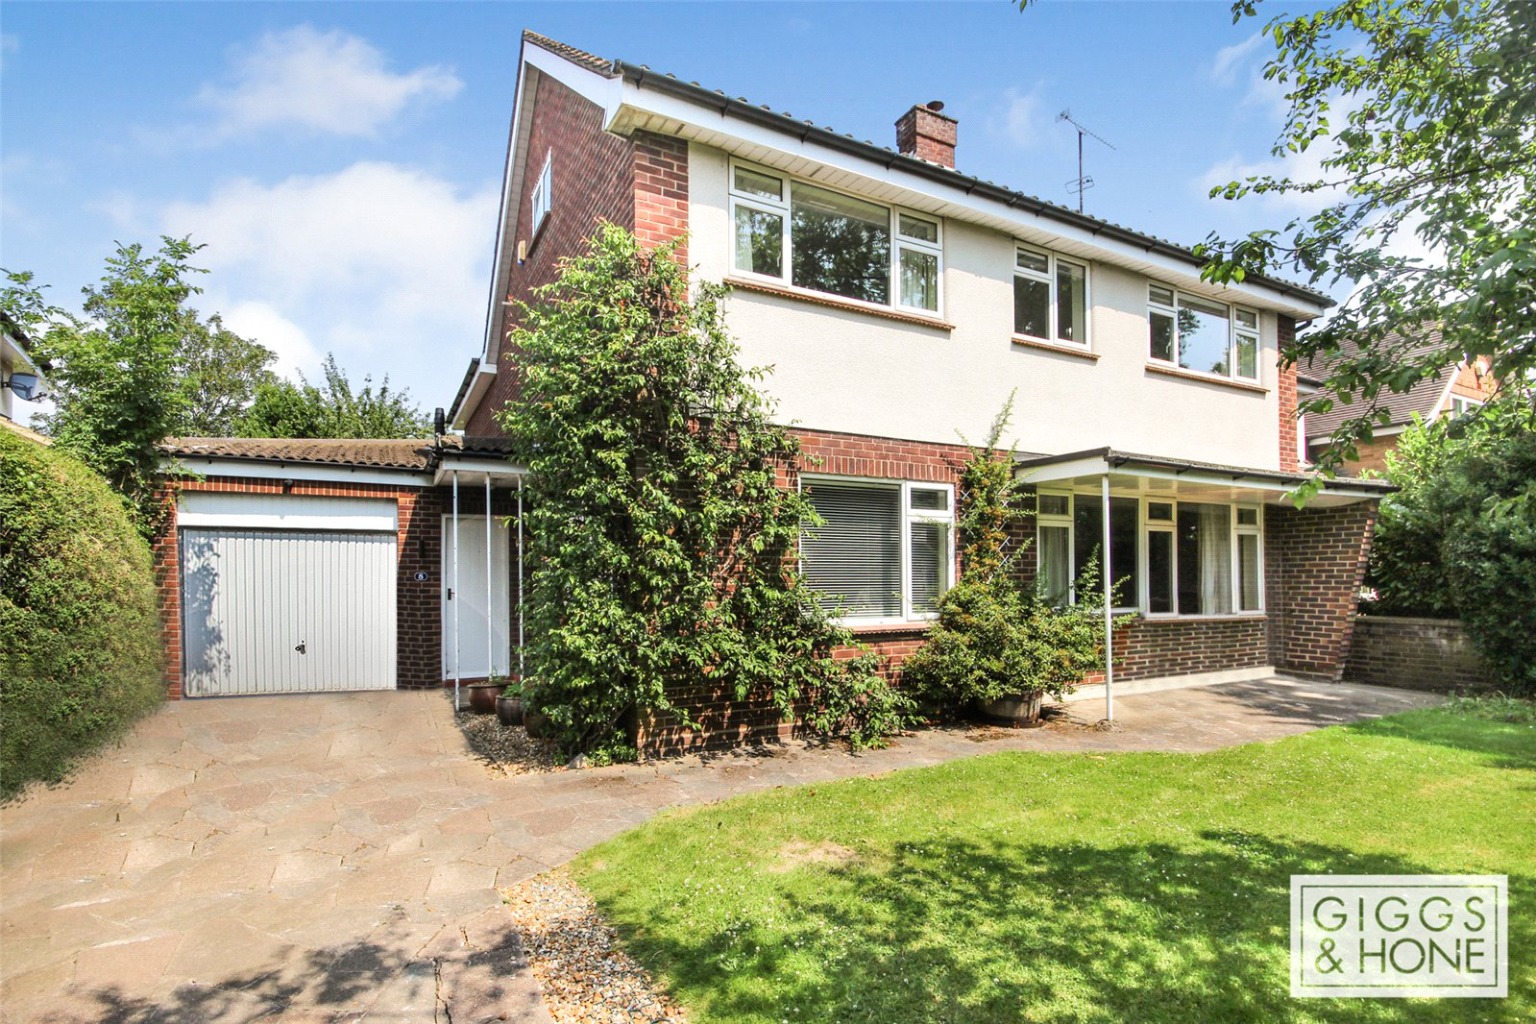 Substantial five bedroom family home situated on the sought after Polhill Avenue which has been extended to create versatile living accommodation for the whole family to enjoy.